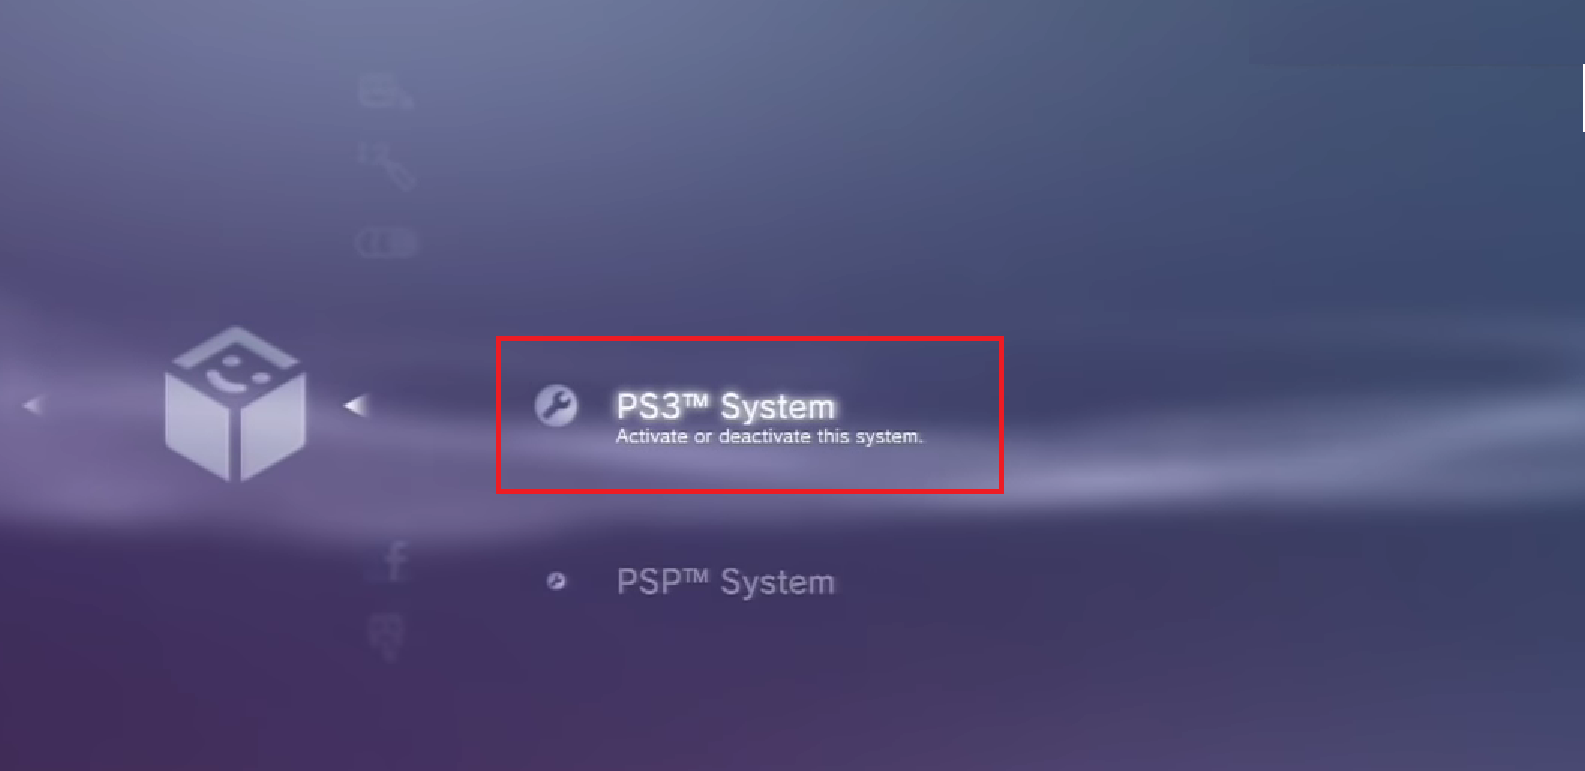 Select the PS3 System option